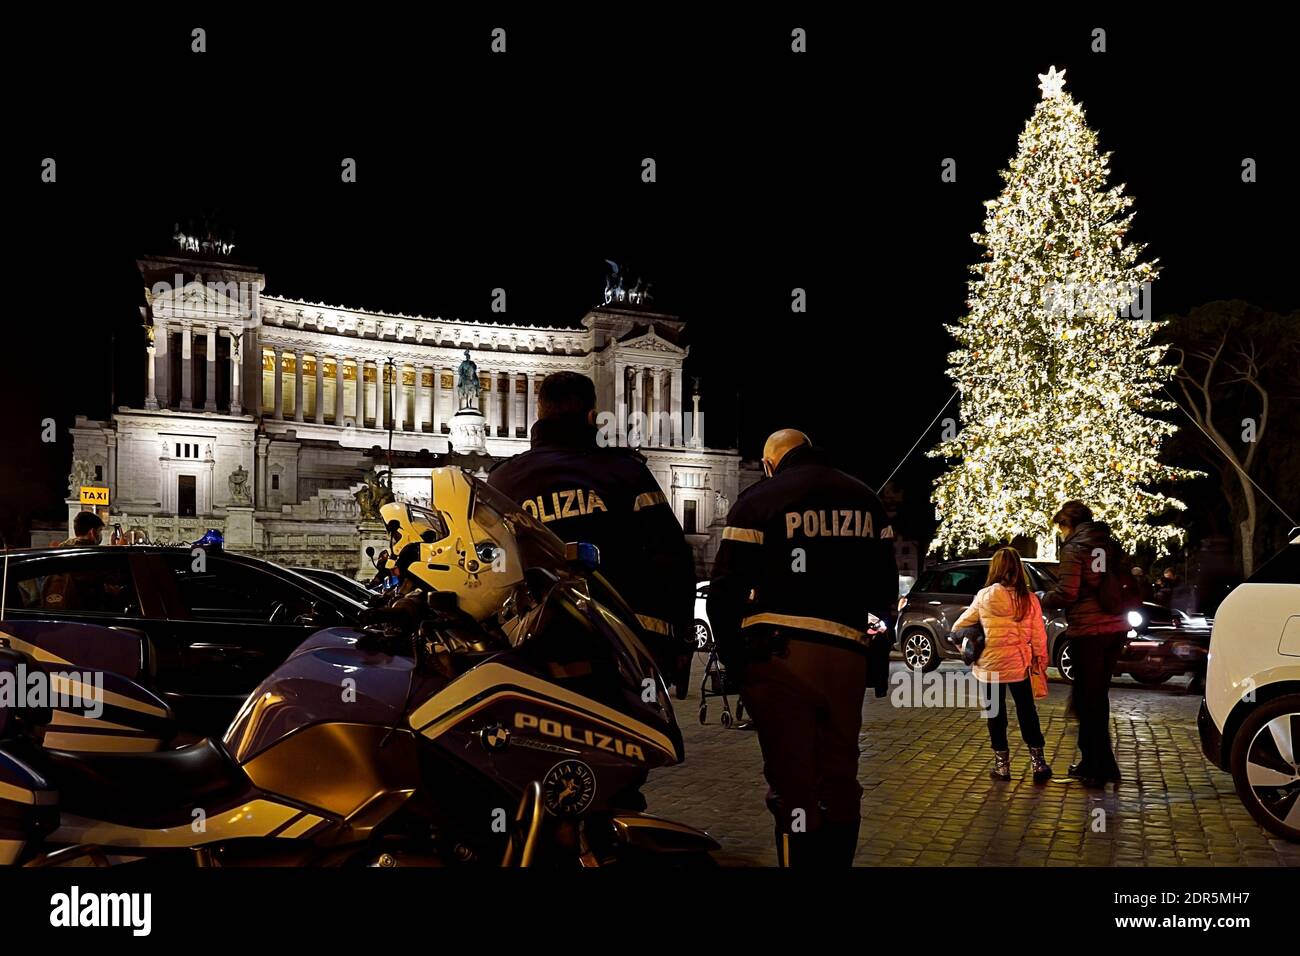 Police officers patrol Venice Square during Christmas holidays. Led lights traditional huge tree set up in Piazza Venezia. Rome, Italy, Europe, EU. Stock Photo